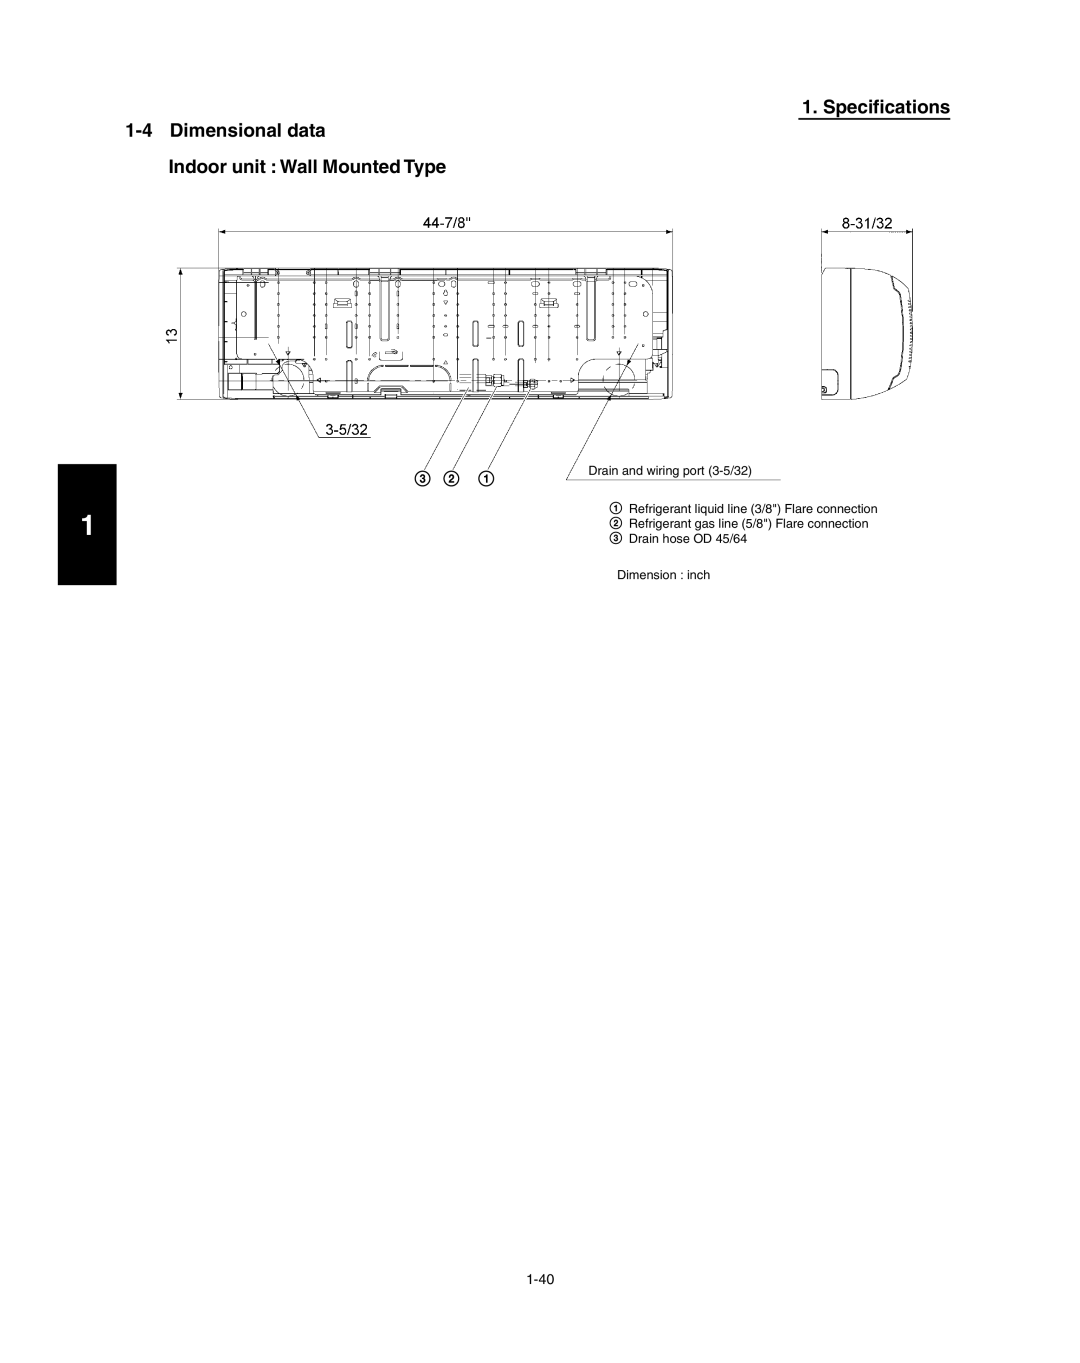 Panasonic R410A Indoor unit : Wall Mounted Type, 1-4Dimensional data, Specifications, Drain and wiring port 3-5/32 